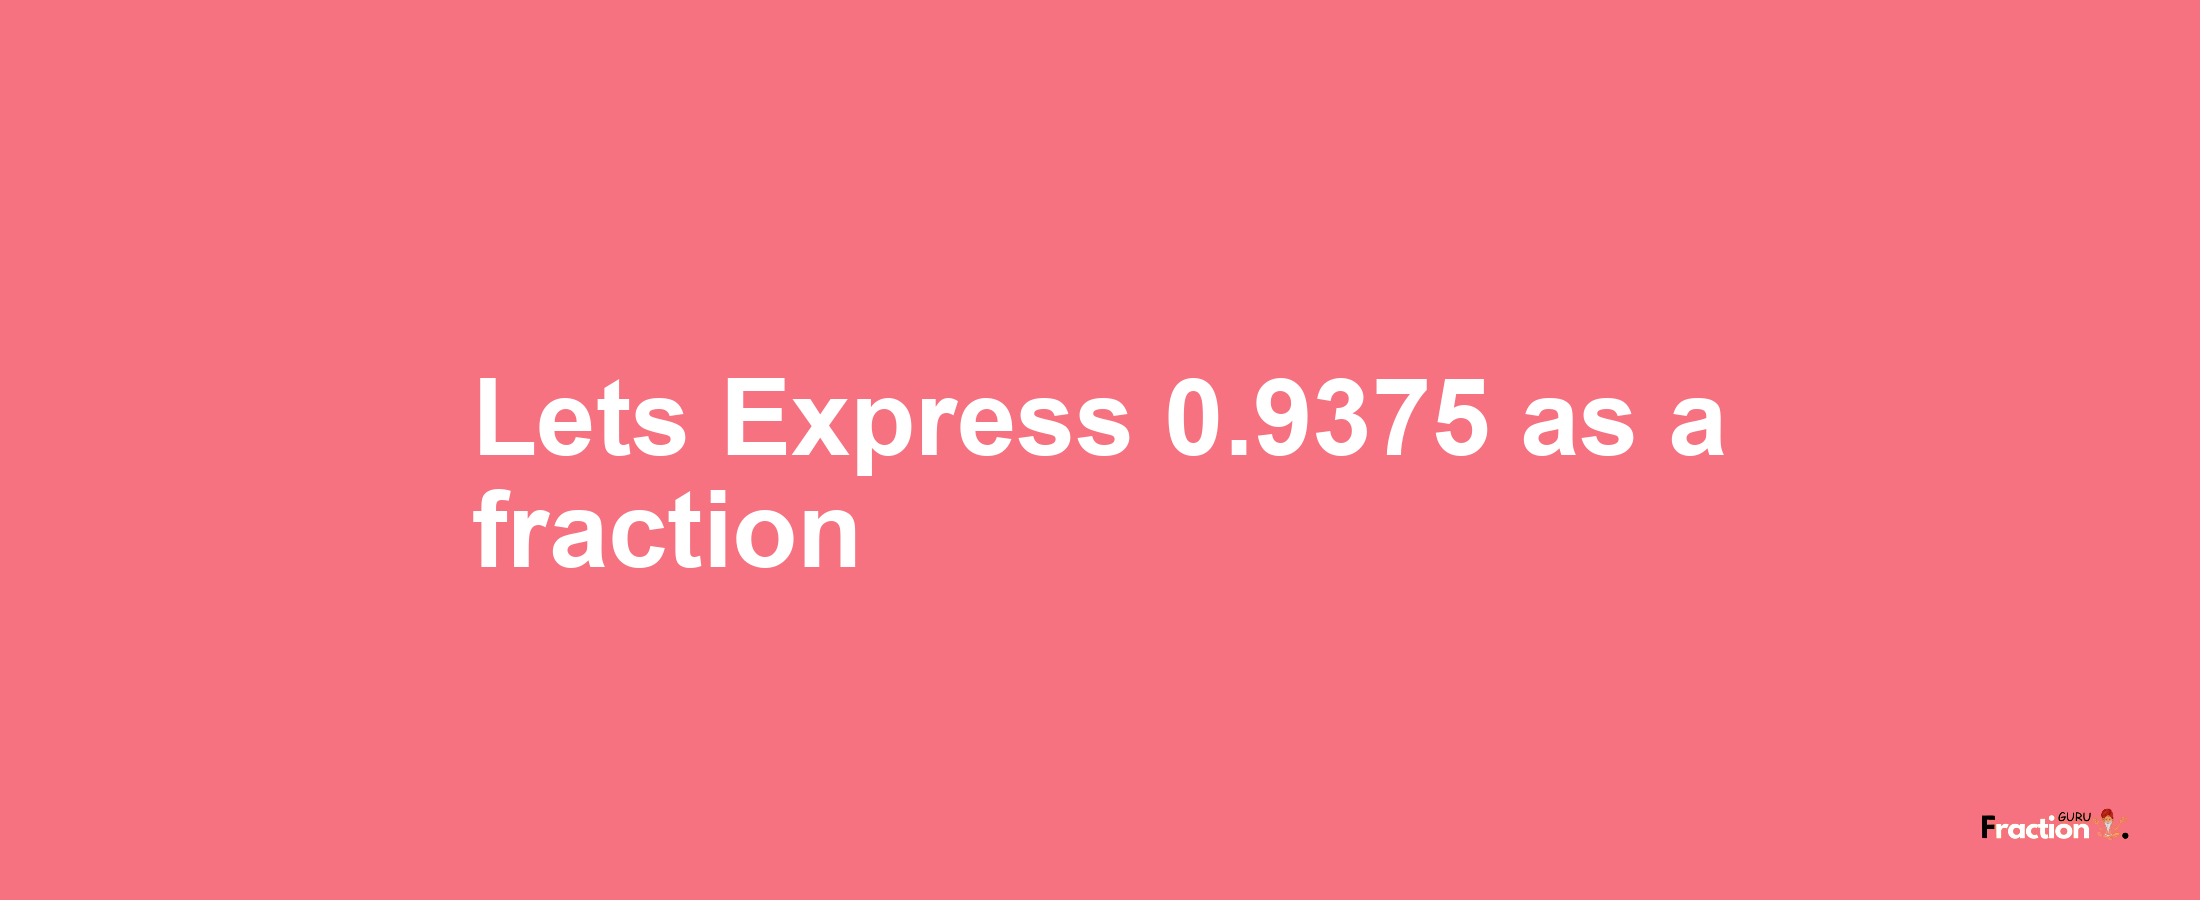 Lets Express 0.9375 as afraction